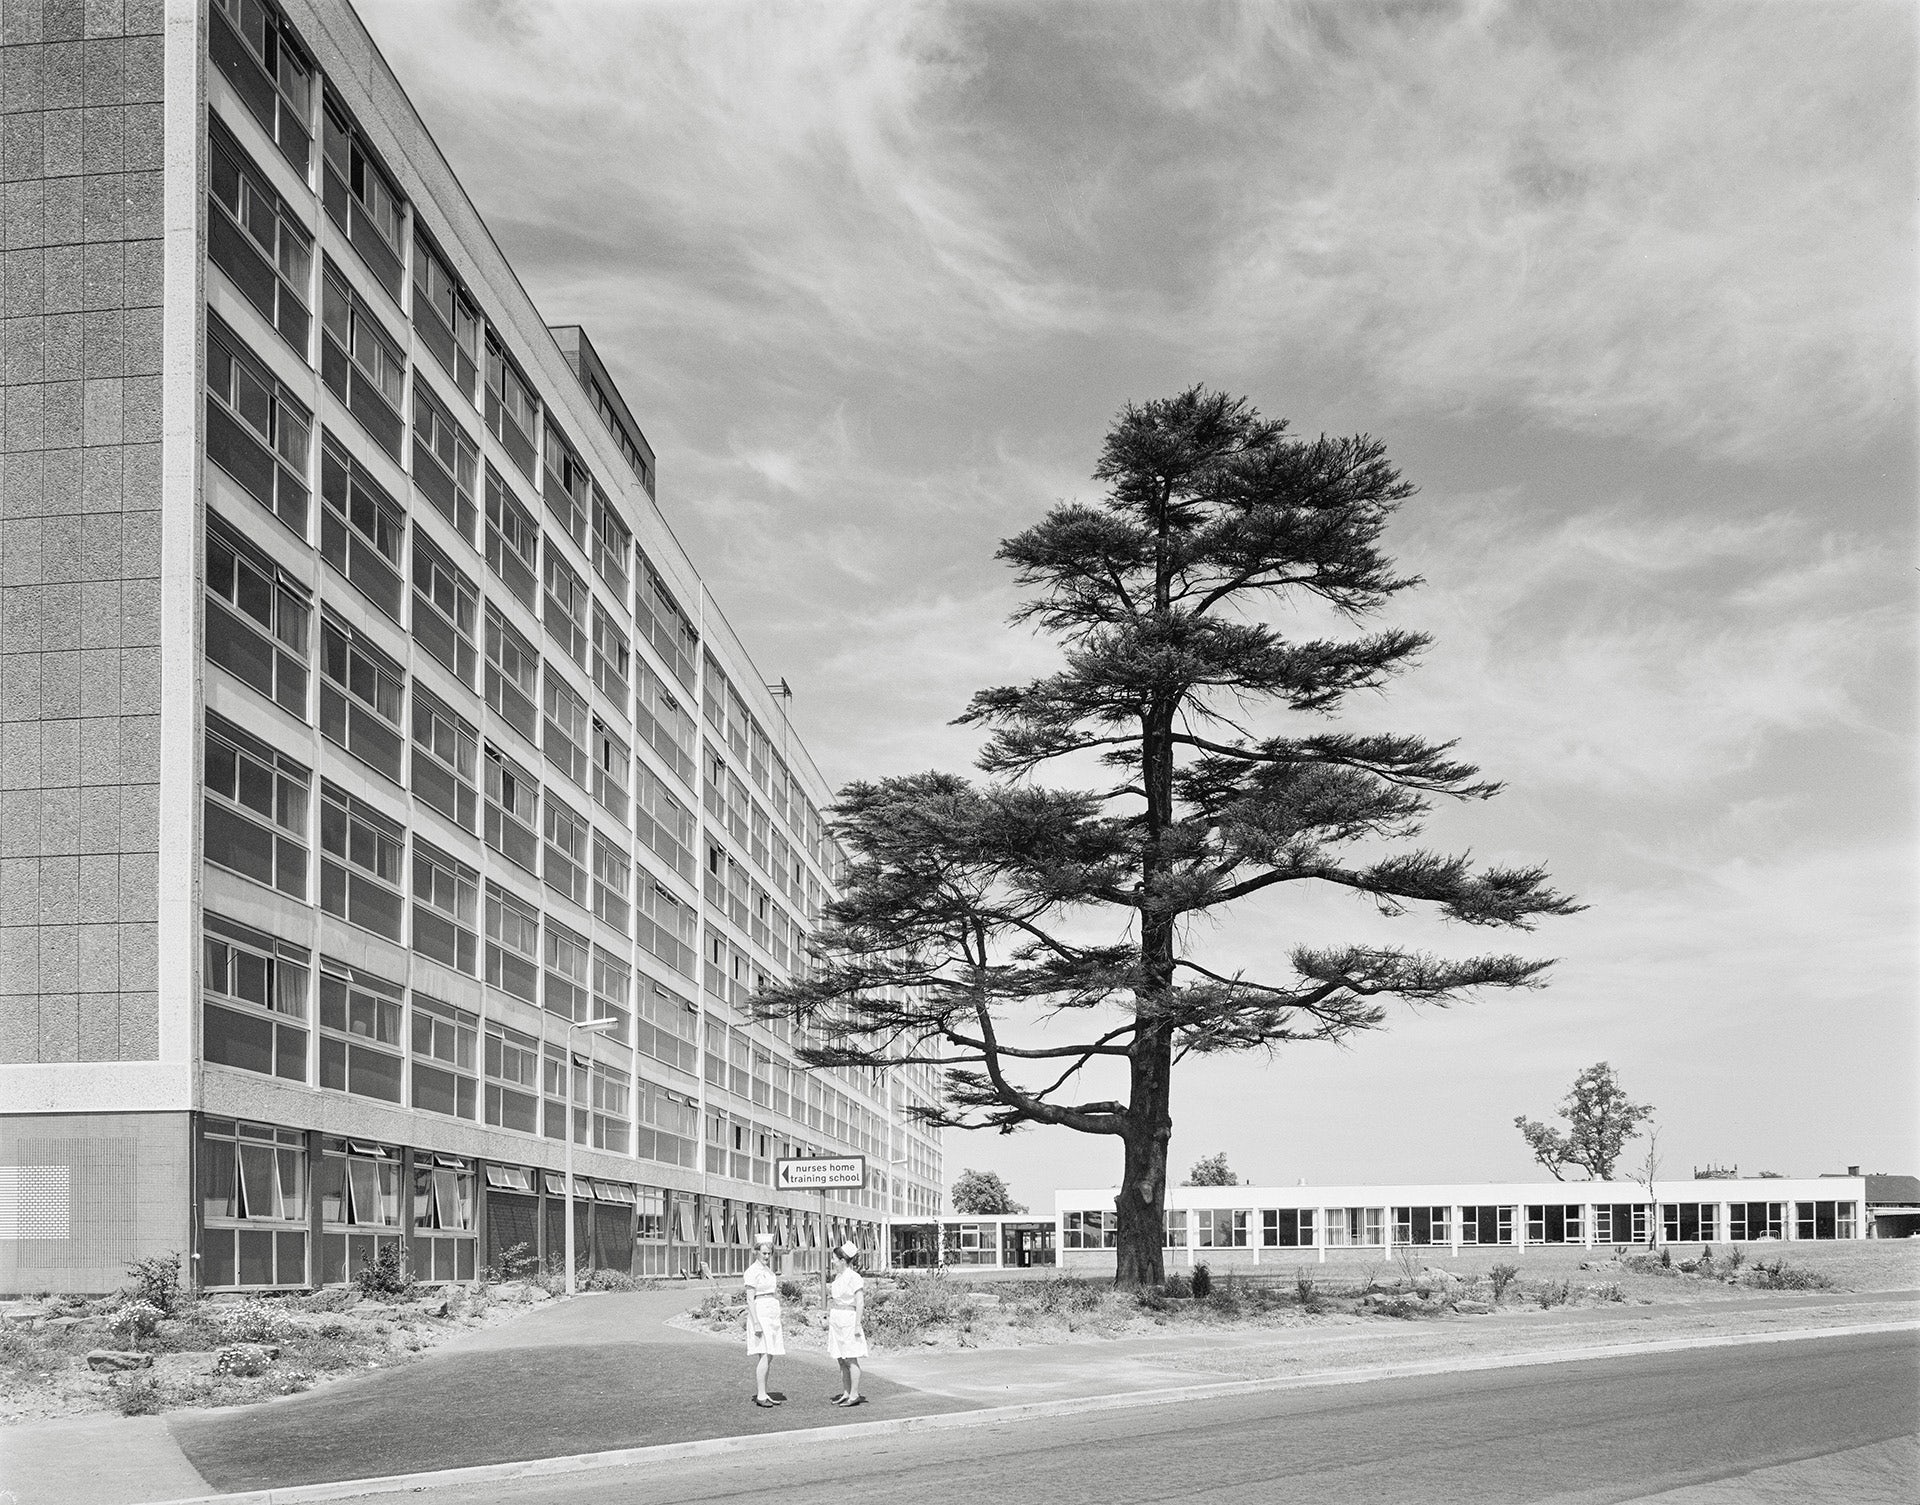 Black and white photograph of a large brutalist hospital building with a tree in front of it